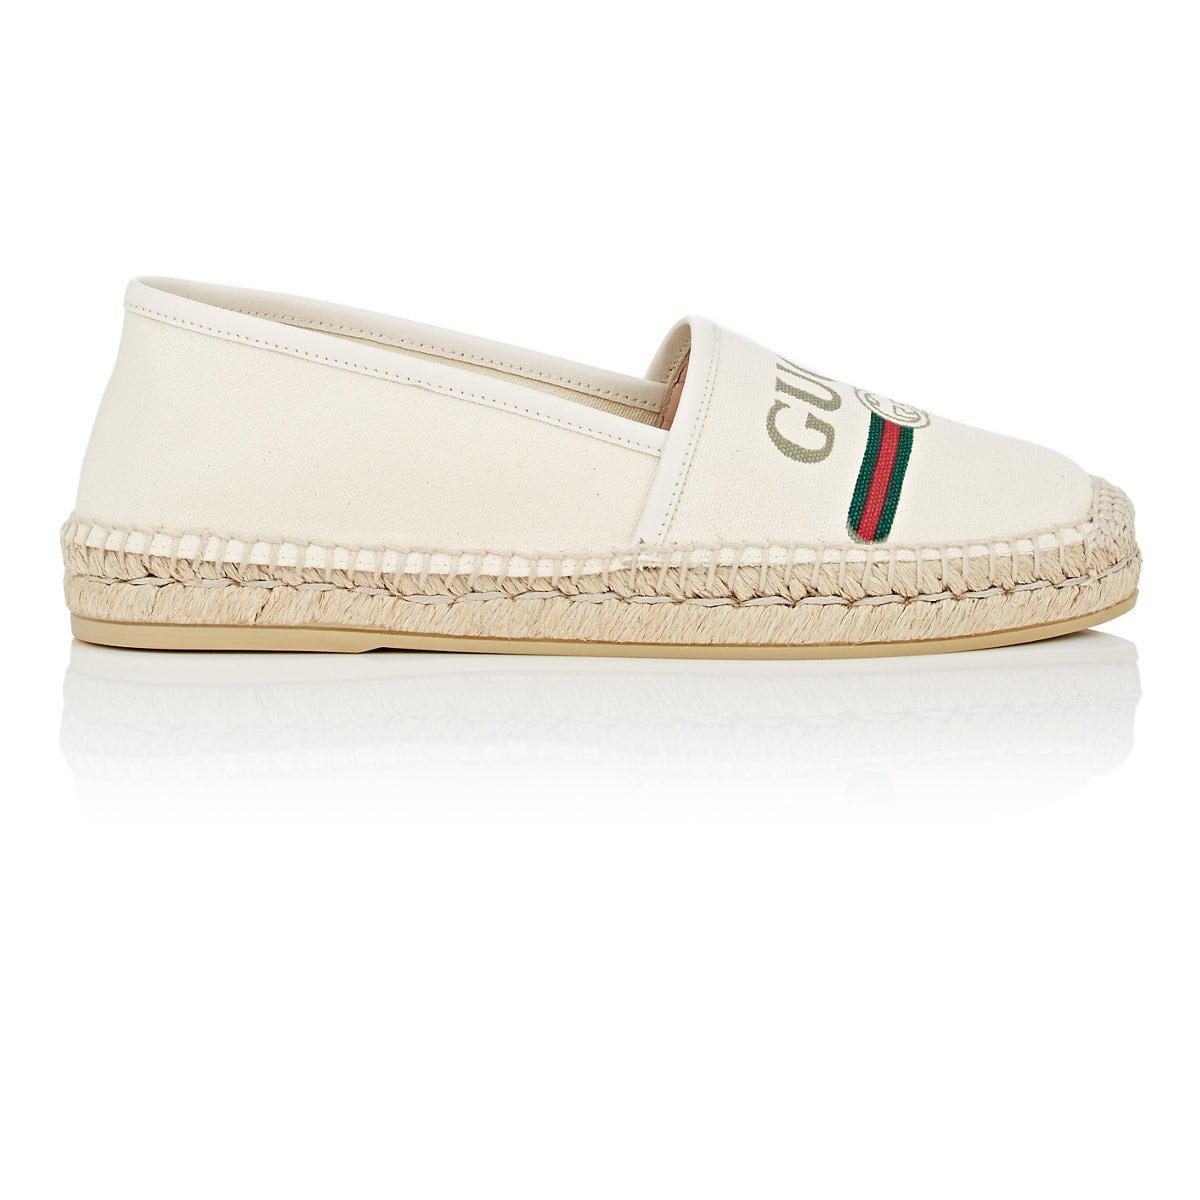 Gucci Logo Canvas Espadrilles in White - Save 17% - Lyst